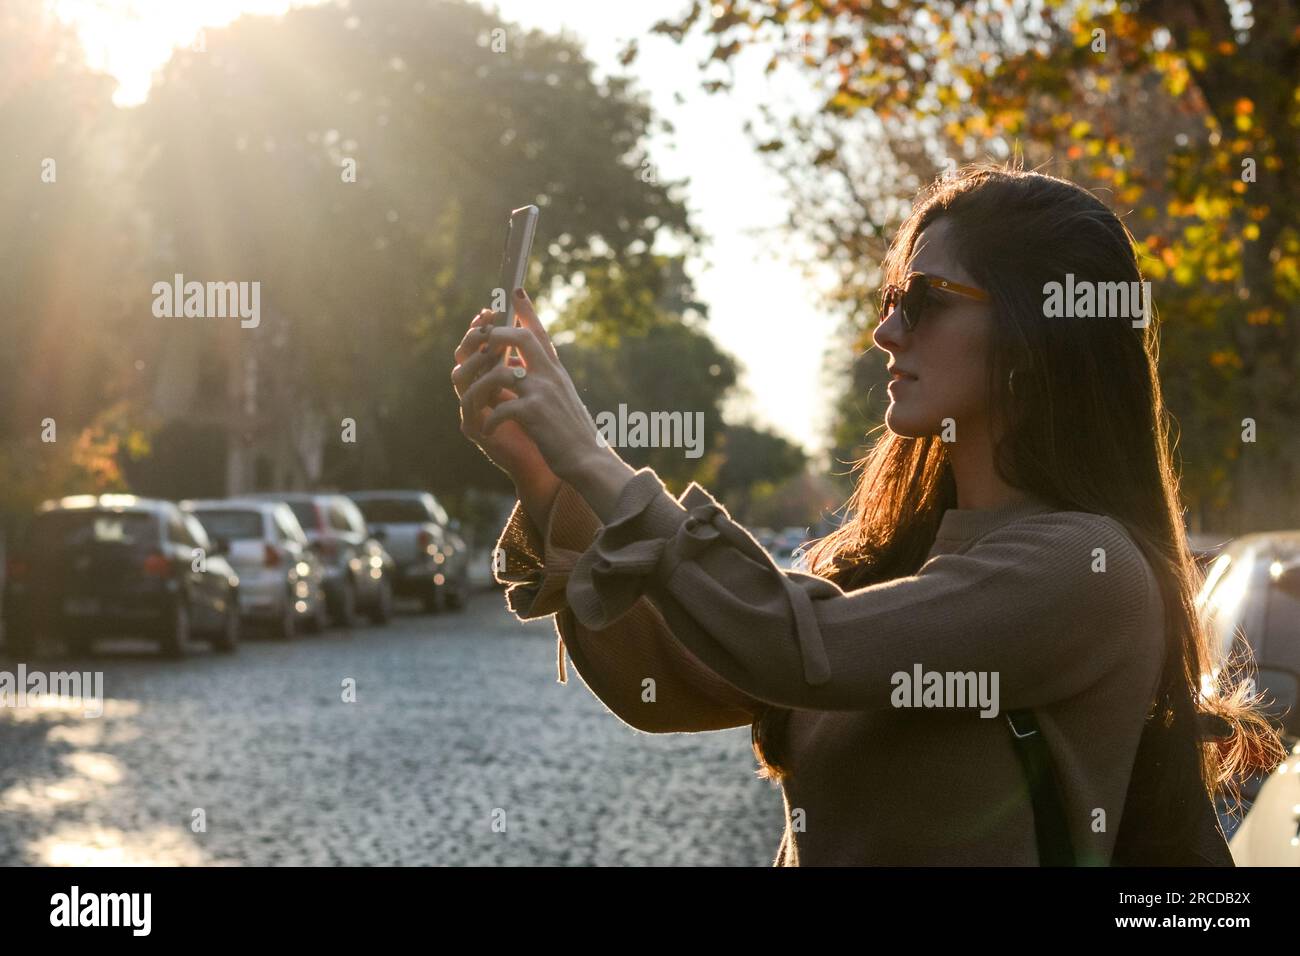 Side view of young woman photographing while standing on the street Stock Photo